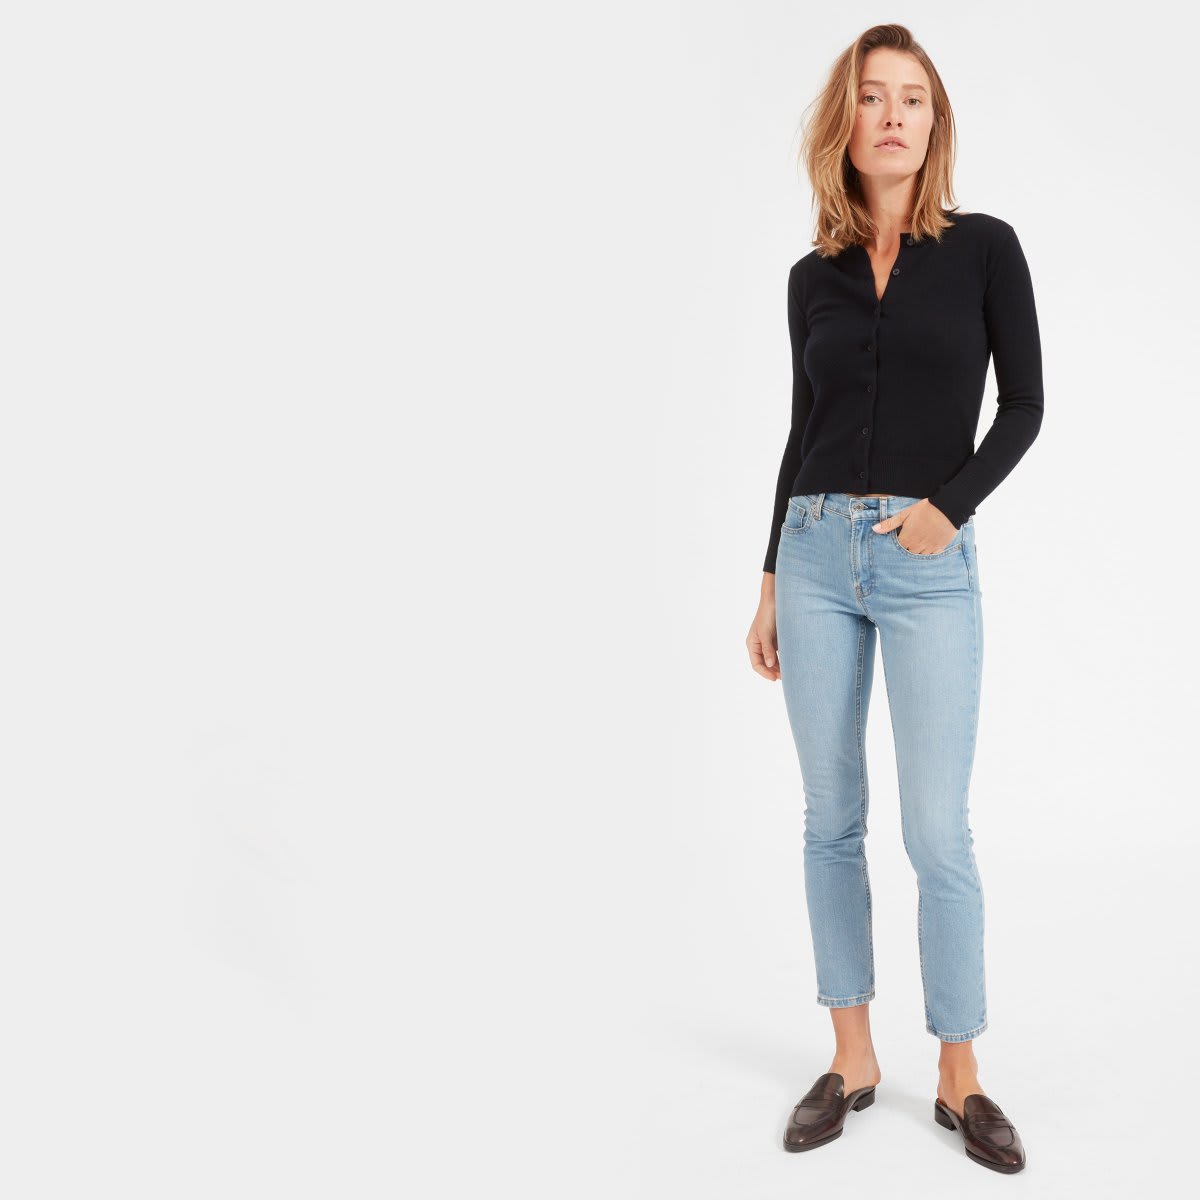 everlane ankle jeans